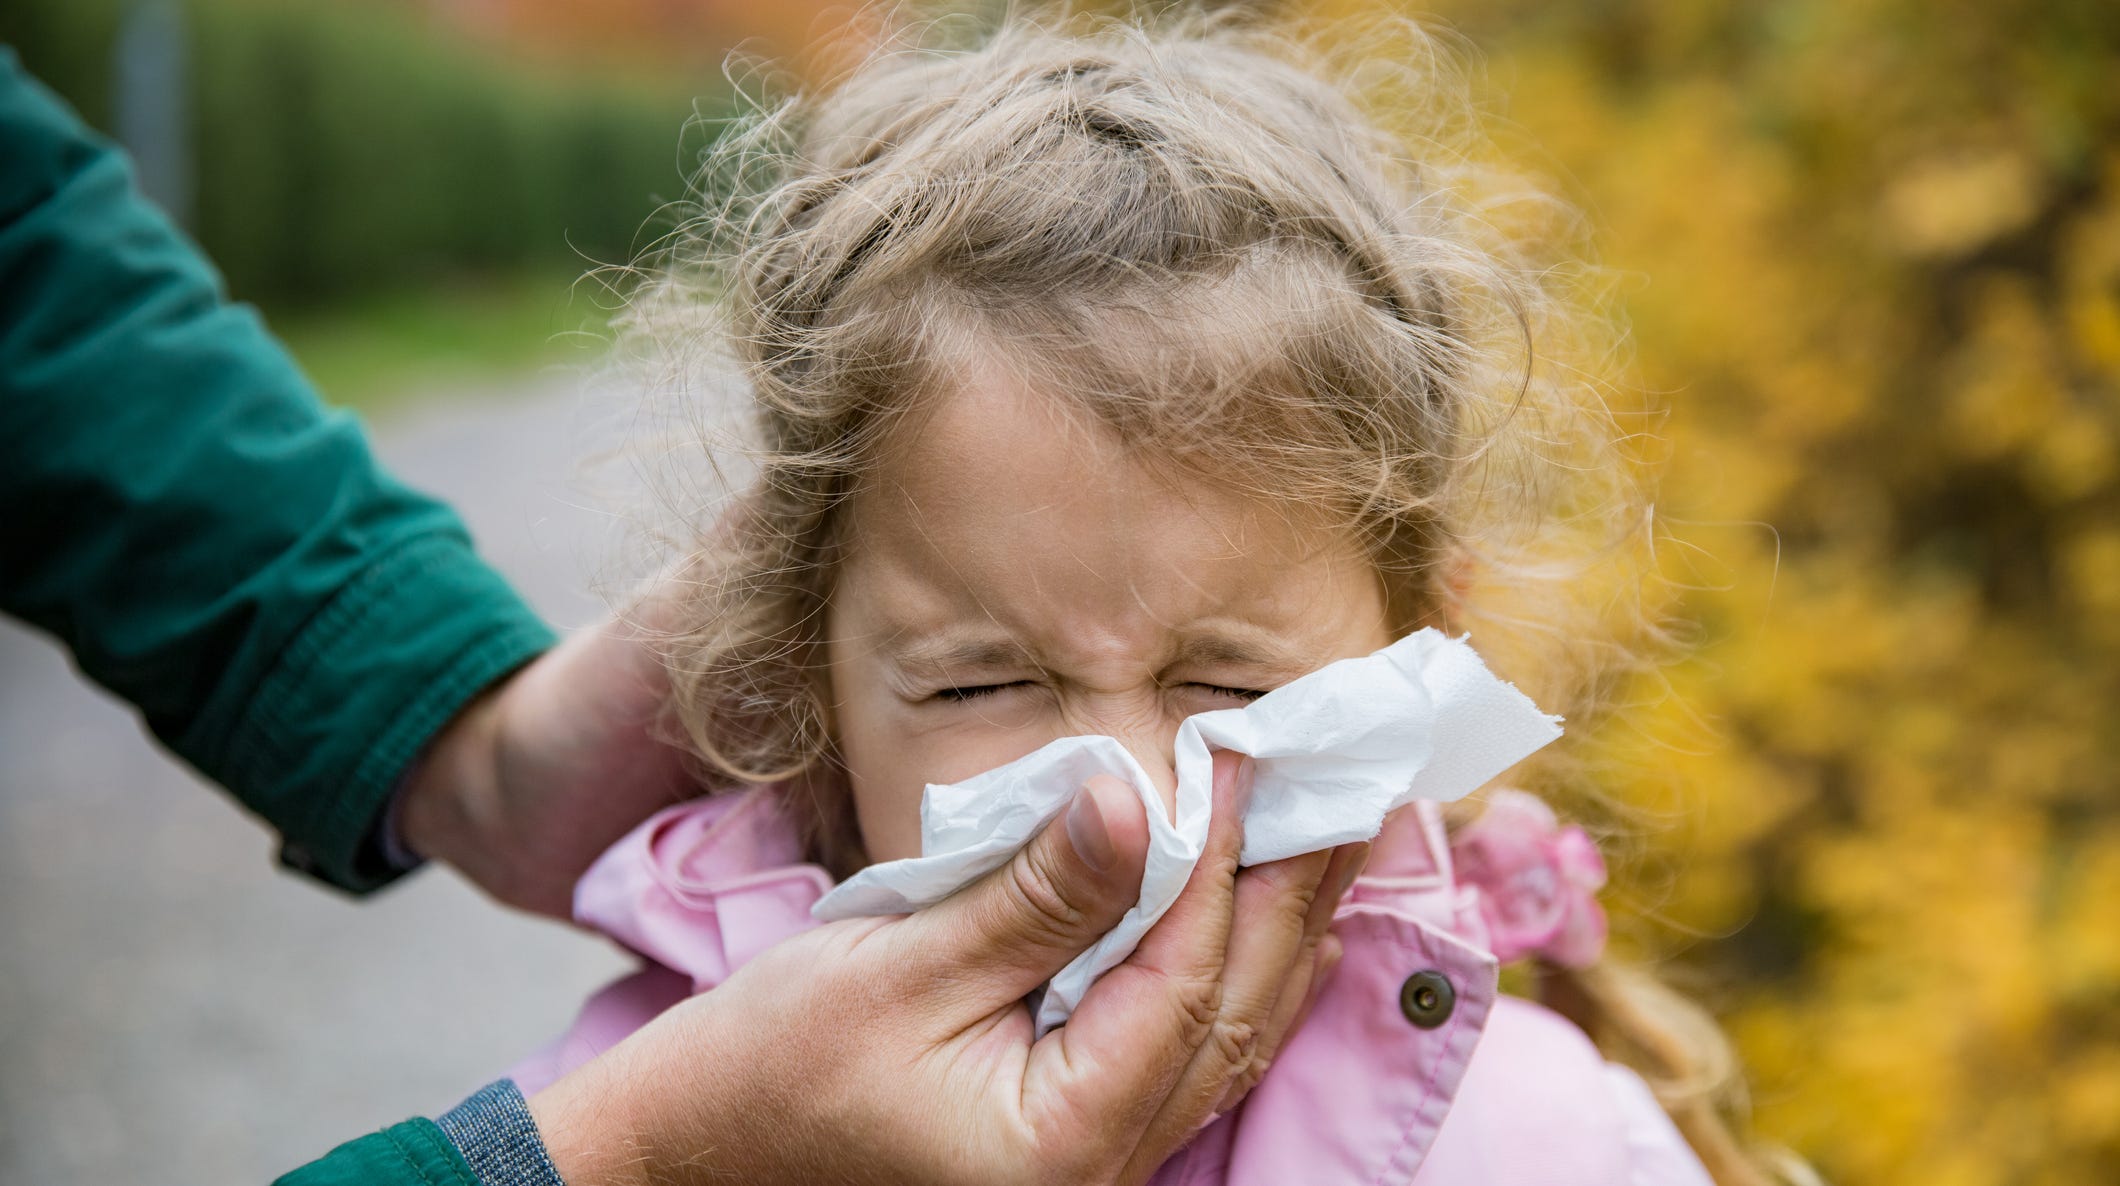 Flu season nearing end, but 20 states report highest level of activity